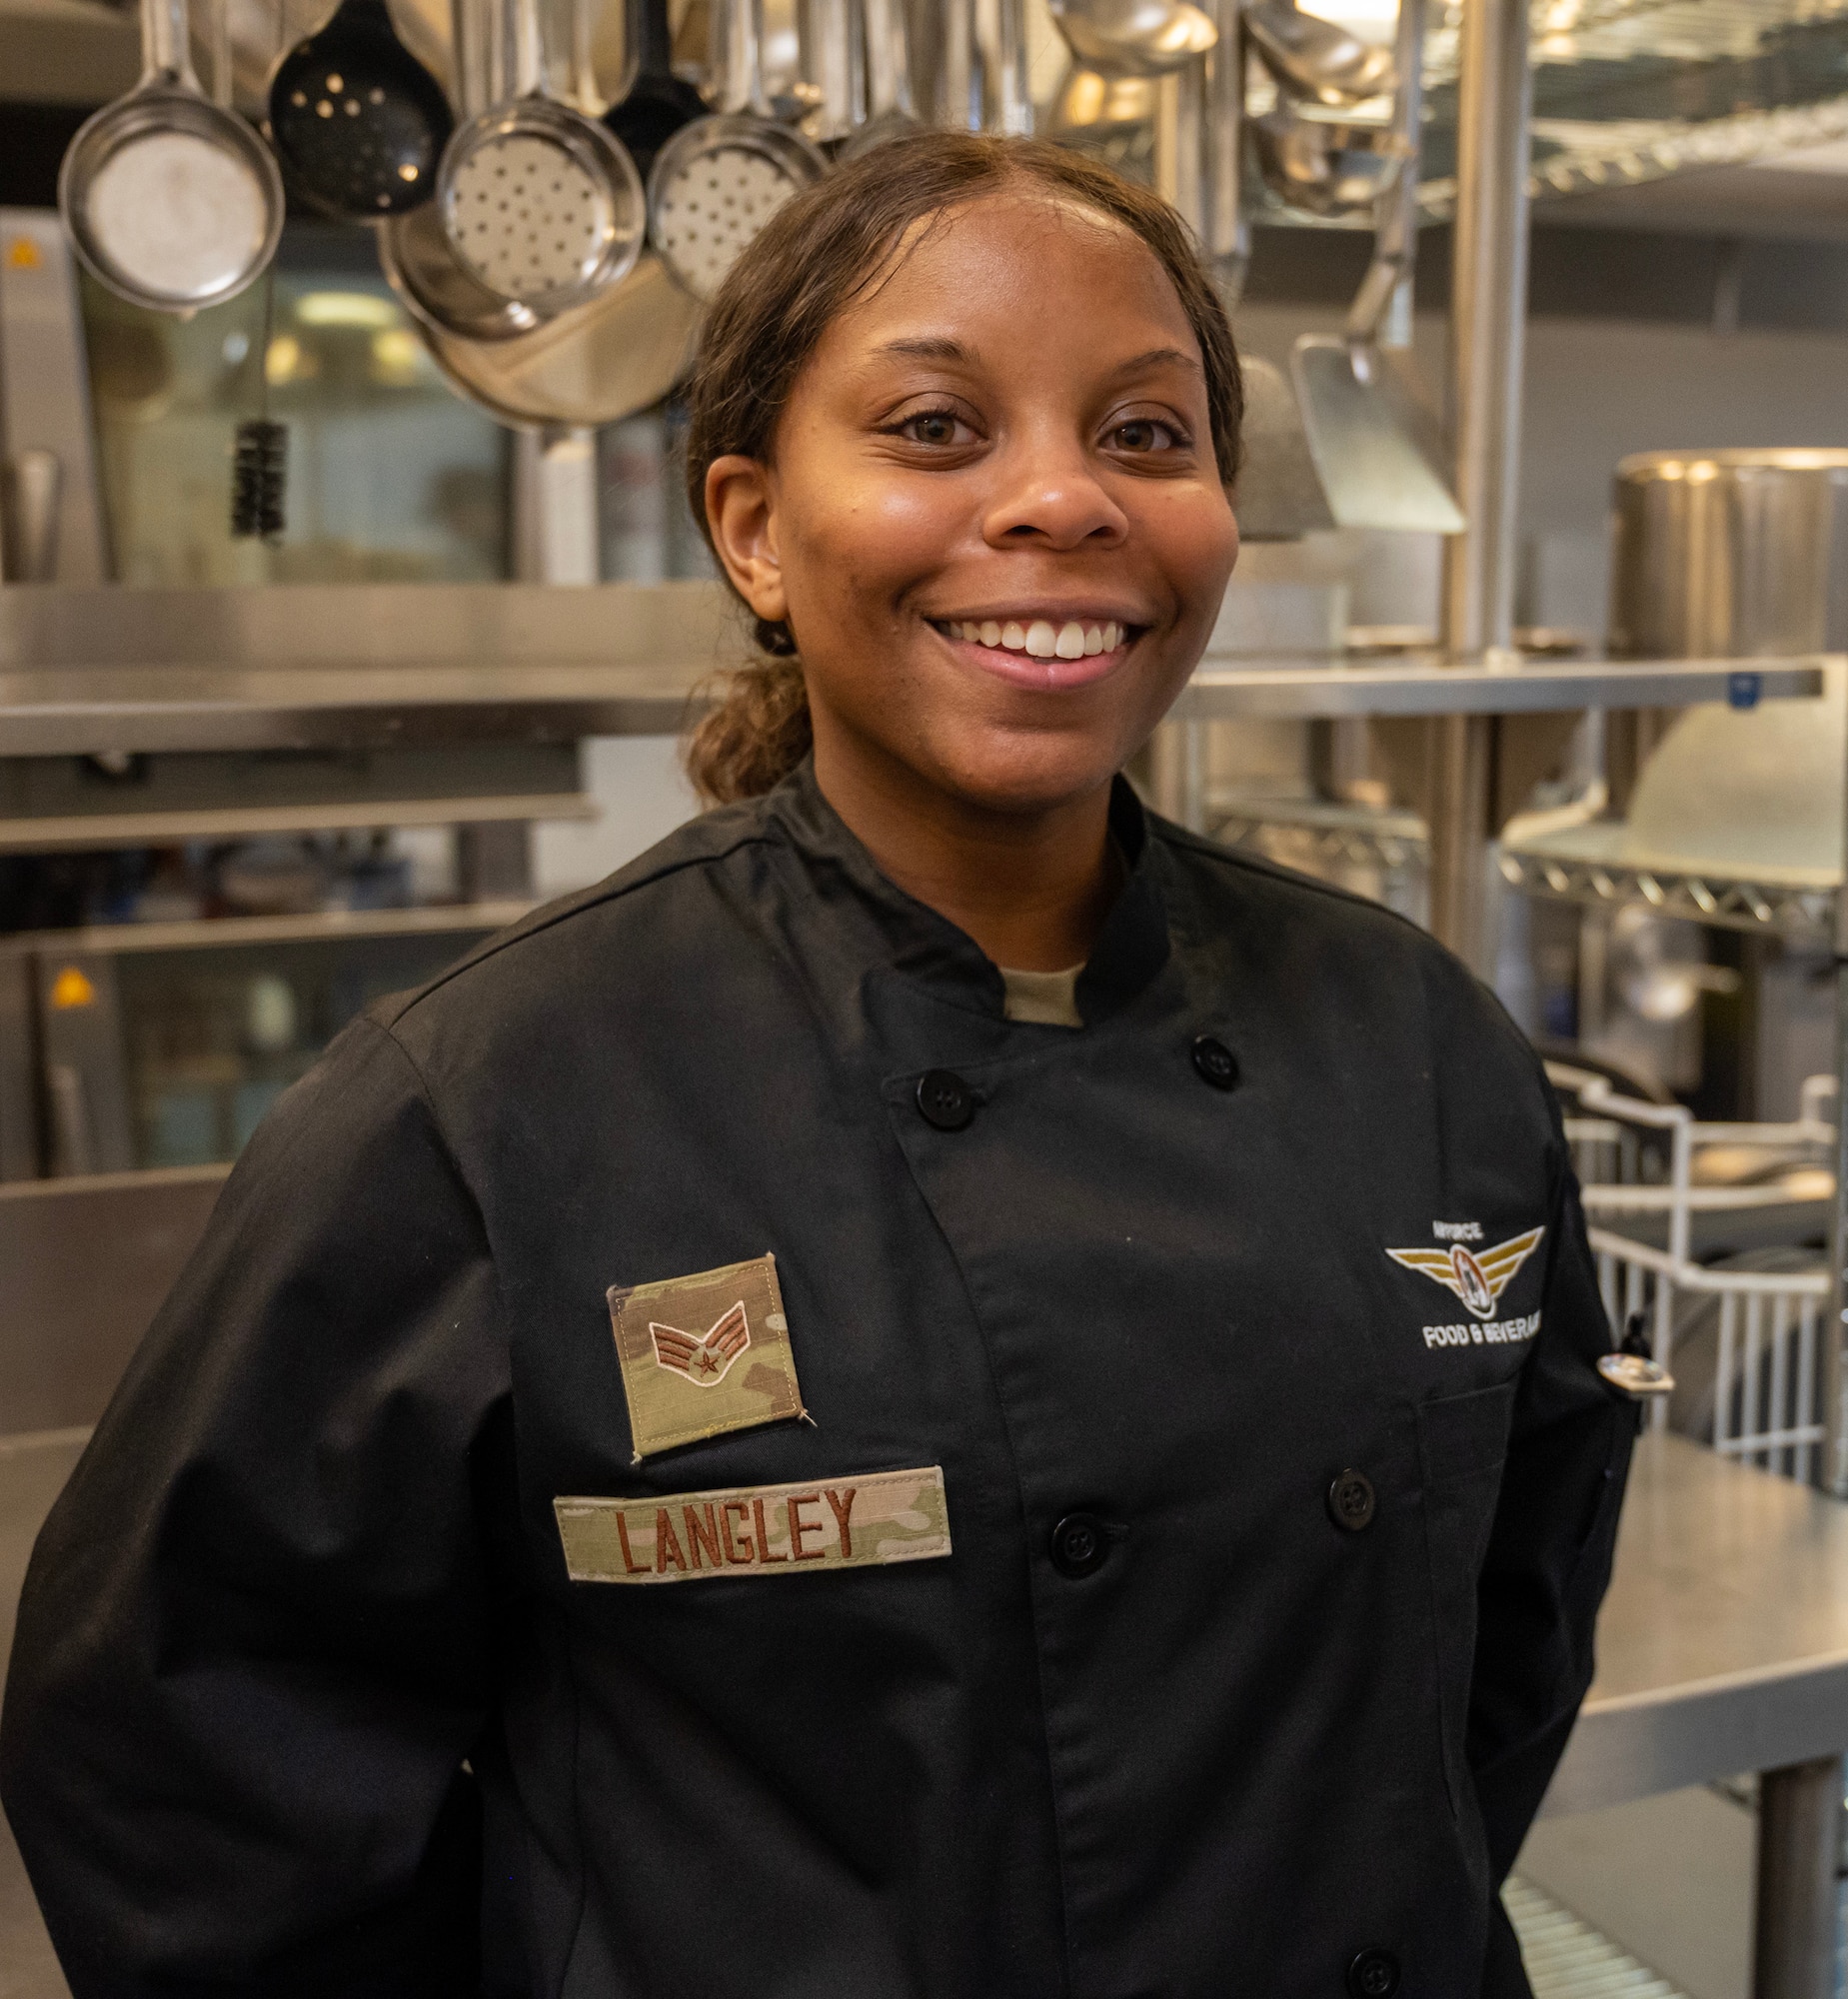 A U.S. Air Force Airman proudly poses for a photo in a military kitchen. She is wearing the new Services "dress black" chef's uniform. In the background, ladles, pots and pans hang from an overhead rack.